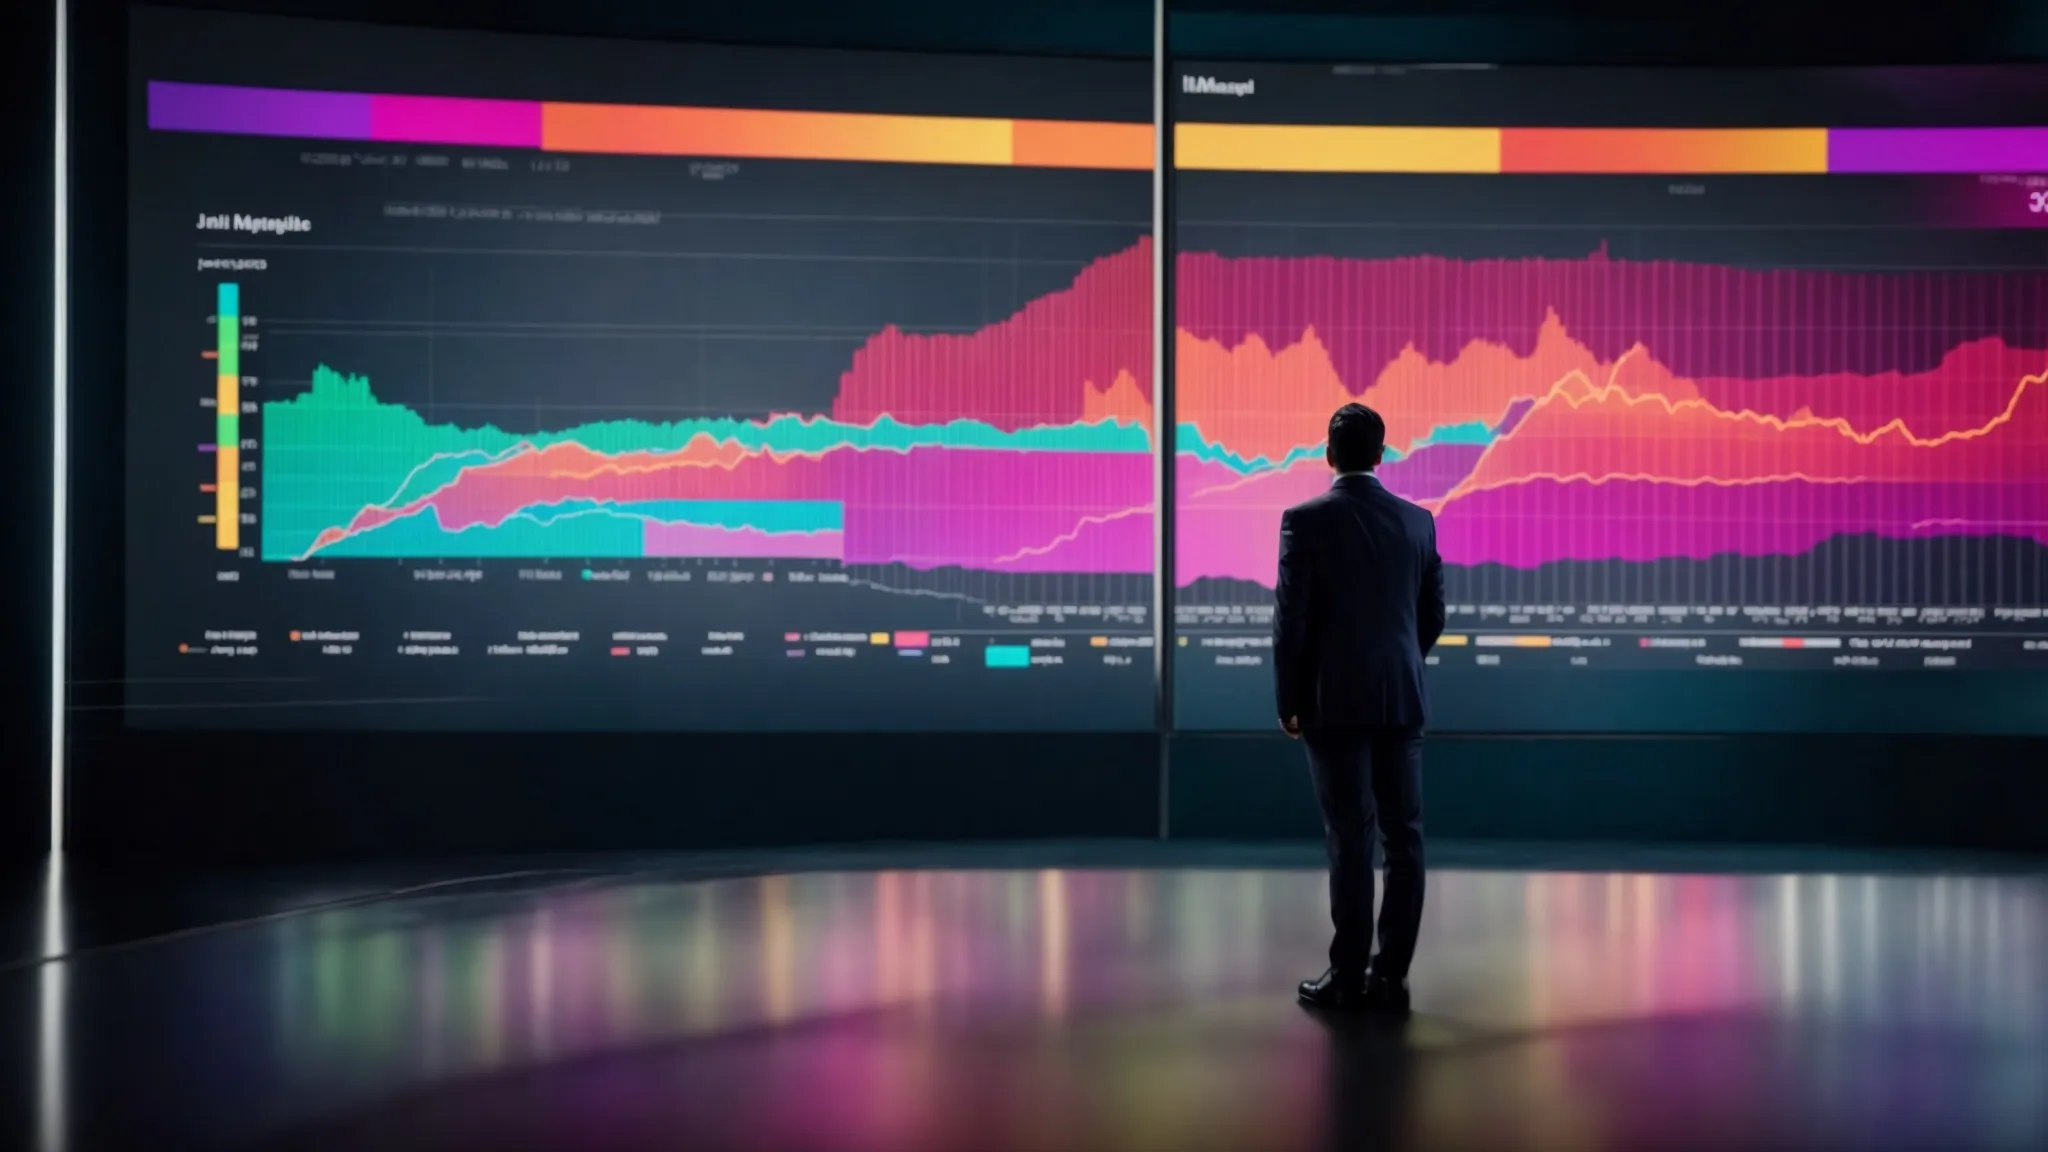 a digital marketer stands before a large screen displaying colorful graphs and segmented audience data, deeply engrossed in strategizing.